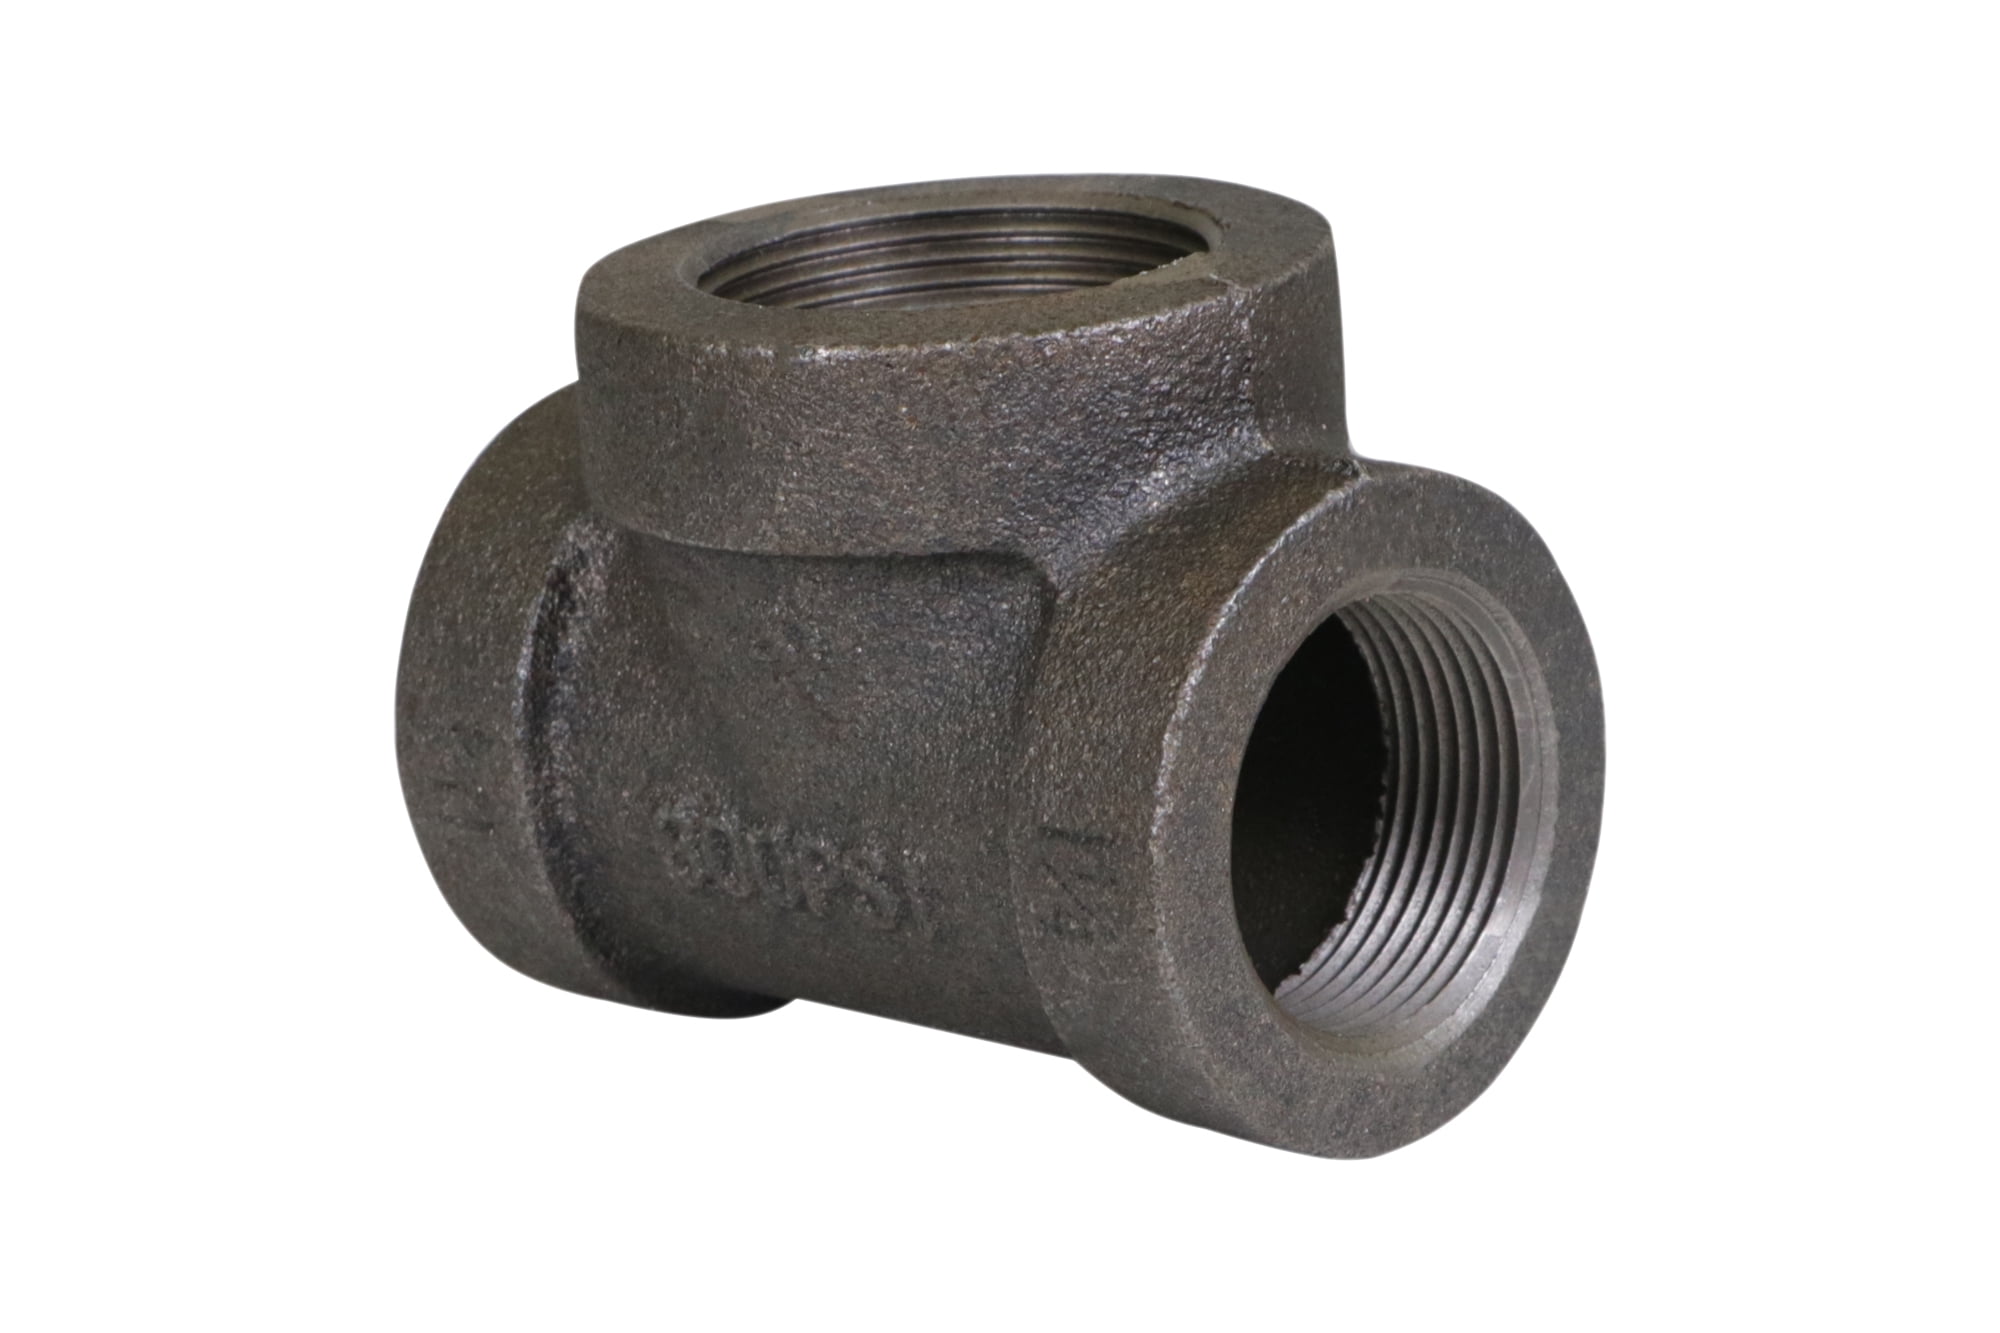 2" x 1" Inch Black Iron FPT x FPT Reducing Coupling Pipe Threaded Fitting